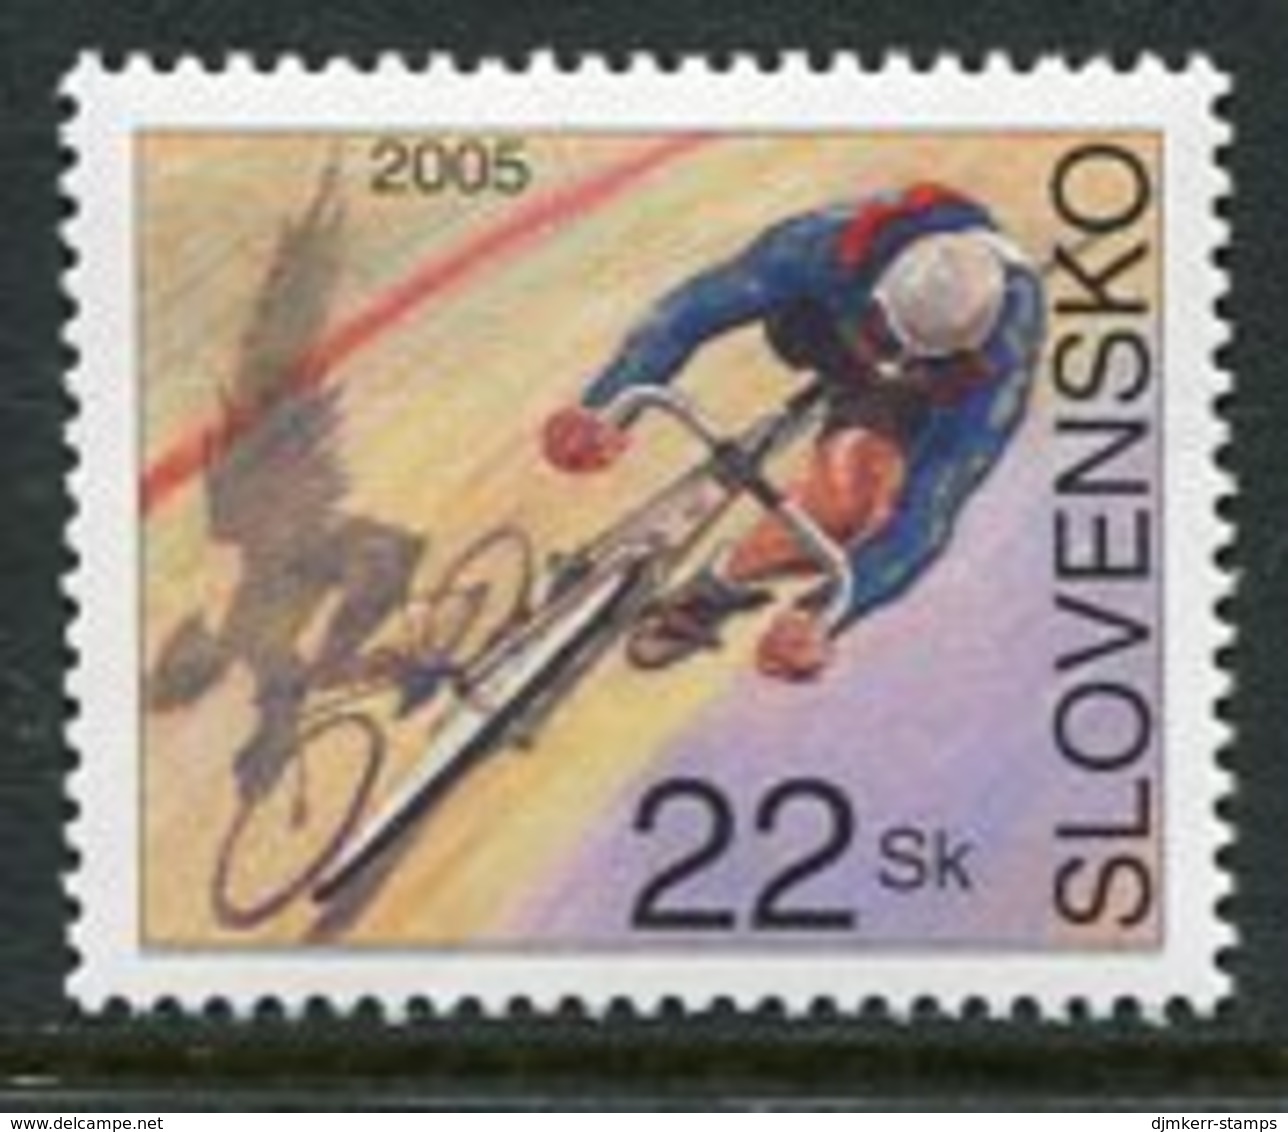 SLOVAKIA 2005 Paralympic Cycle Racing Medallist  MNH / **.  Michel 511 - Unused Stamps